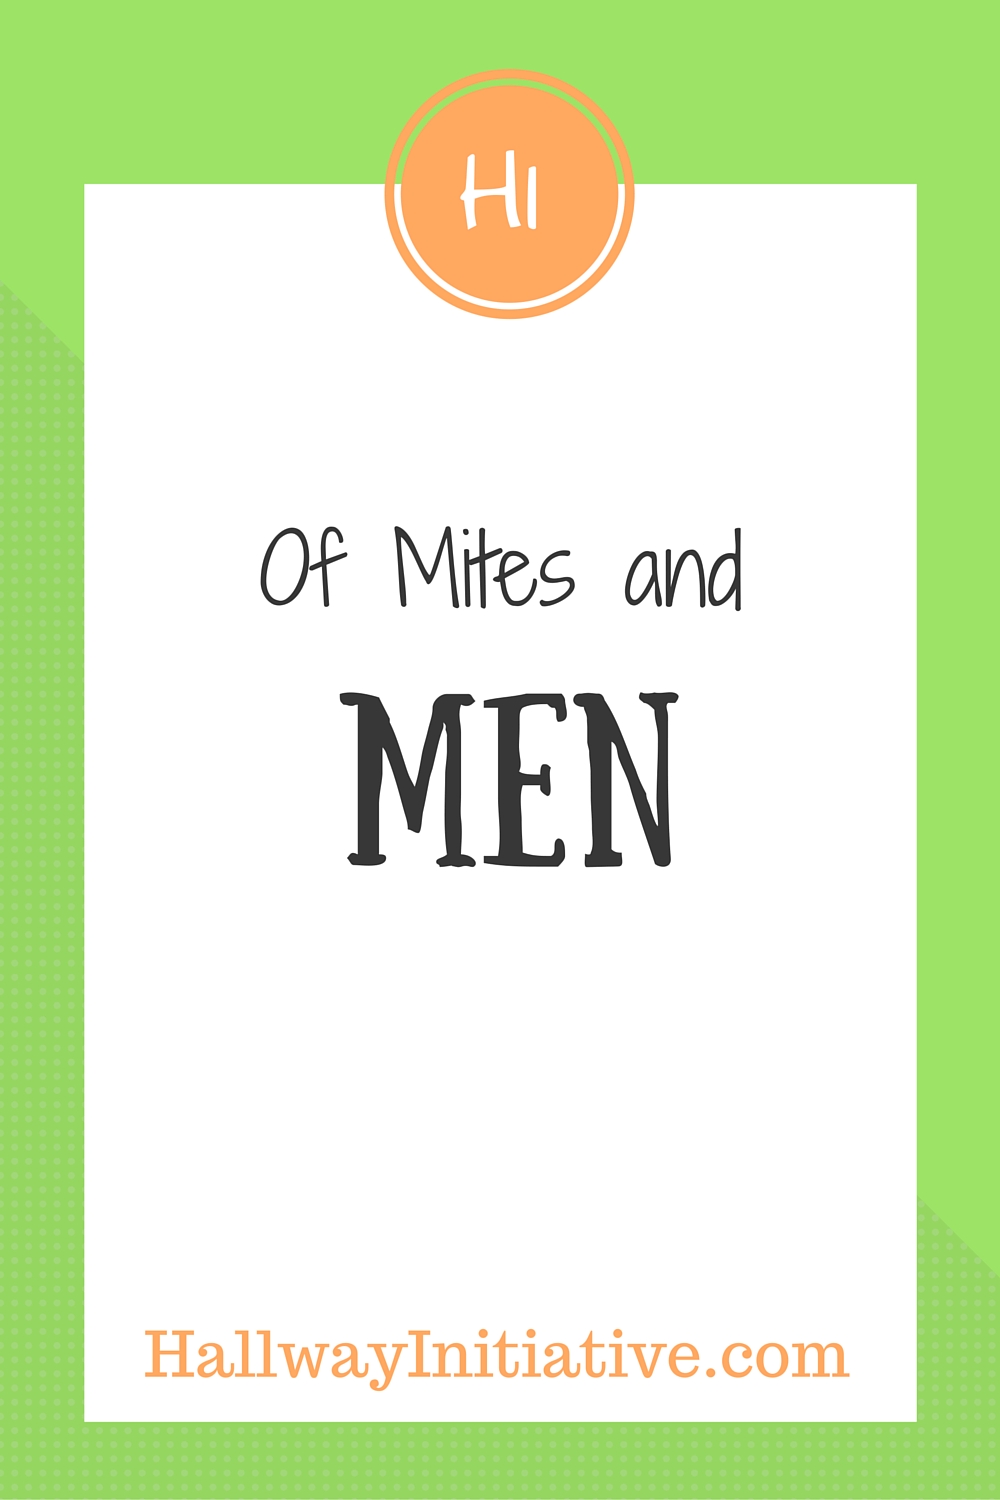 Of mites and men